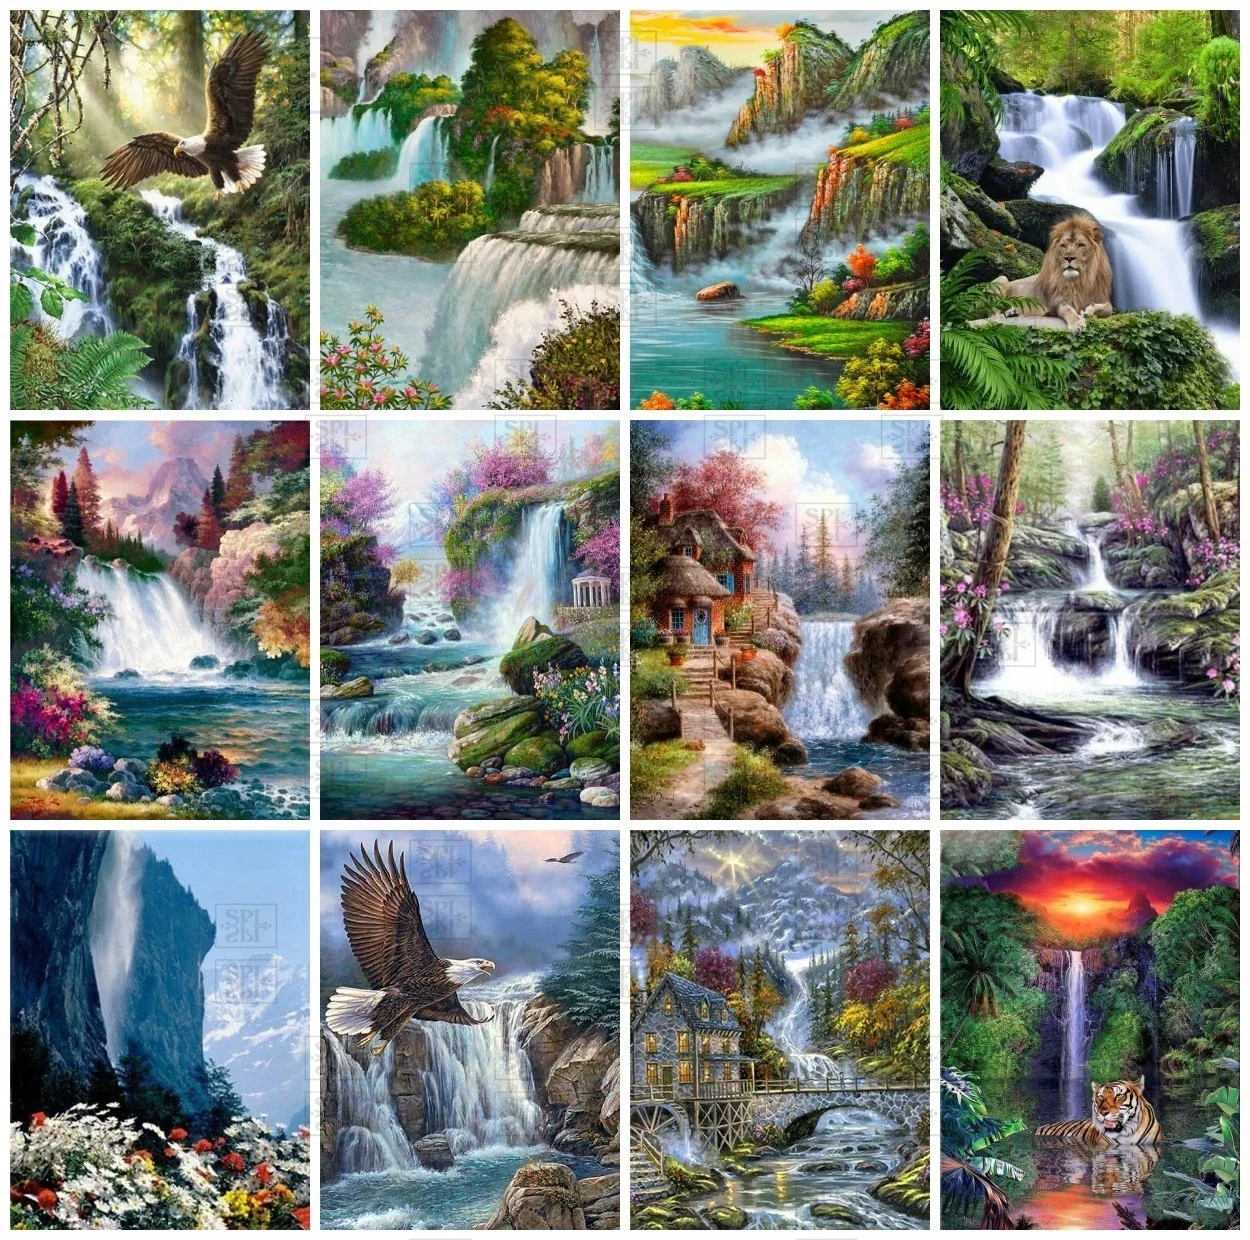 

Diy Diamond Embroidery Waterfall House Landscape 5D Diamond Painting Nature Scenery Rhinestone Mosaic Pictures Home Decor Gift